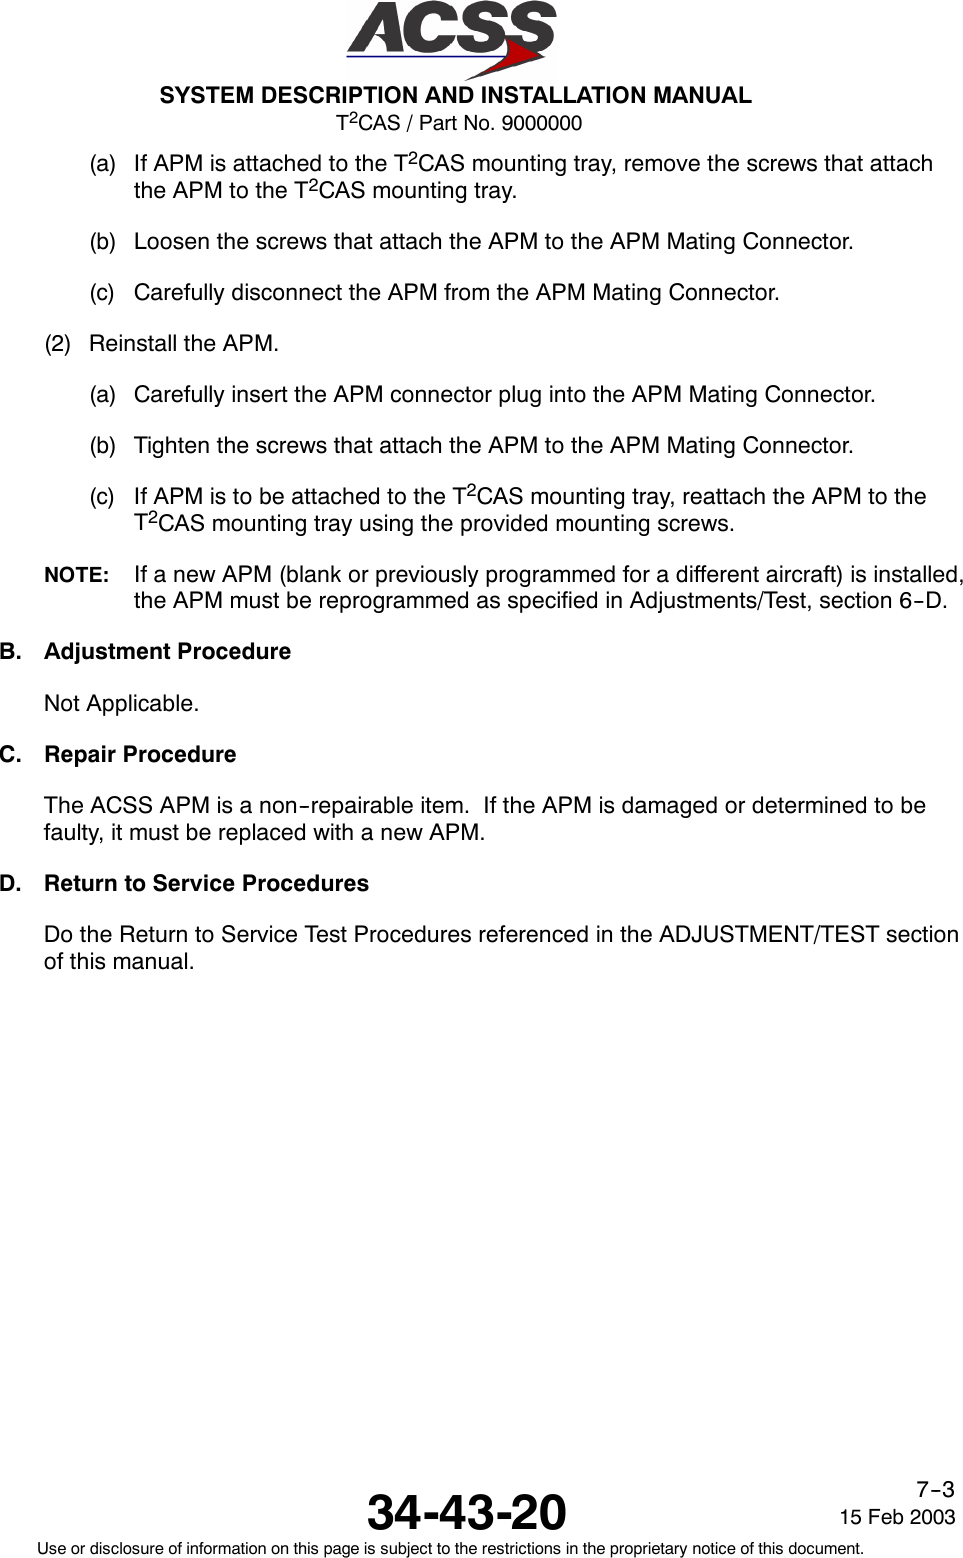 T2CAS / Part No. 9000000SYSTEM DESCRIPTION AND INSTALLATION MANUAL34-43-20 15 Feb 2003Use or disclosure of information on this page is subject to the restrictions in the proprietary notice of this document.7--3(a) If APM is attached to the T2CAS mounting tray, remove the screws that attachthe APM to the T2CAS mounting tray.(b) Loosen the screws that attach the APM to the APM Mating Connector.(c) Carefully disconnect the APM from the APM Mating Connector.(2) Reinstall the APM.(a) Carefully insert the APM connector plug into the APM Mating Connector.(b) Tighten the screws that attach the APM to the APM Mating Connector.(c) If APM is to be attached to the T2CAS mounting tray, reattach the APM to theT2CAS mounting tray using the provided mounting screws.NOTE: If a new APM (blank or previously programmed for a different aircraft) is installed,the APM must be reprogrammed as specified in Adjustments/Test, section 6--D.B. Adjustment ProcedureNot Applicable.C. Repair ProcedureThe ACSS APM is a non--repairable item. If the APM is damaged or determined to befaulty, it must be replaced with a new APM.D. Return to Service ProceduresDo the Return to Service Test Procedures referenced in the ADJUSTMENT/TEST sectionof this manual.